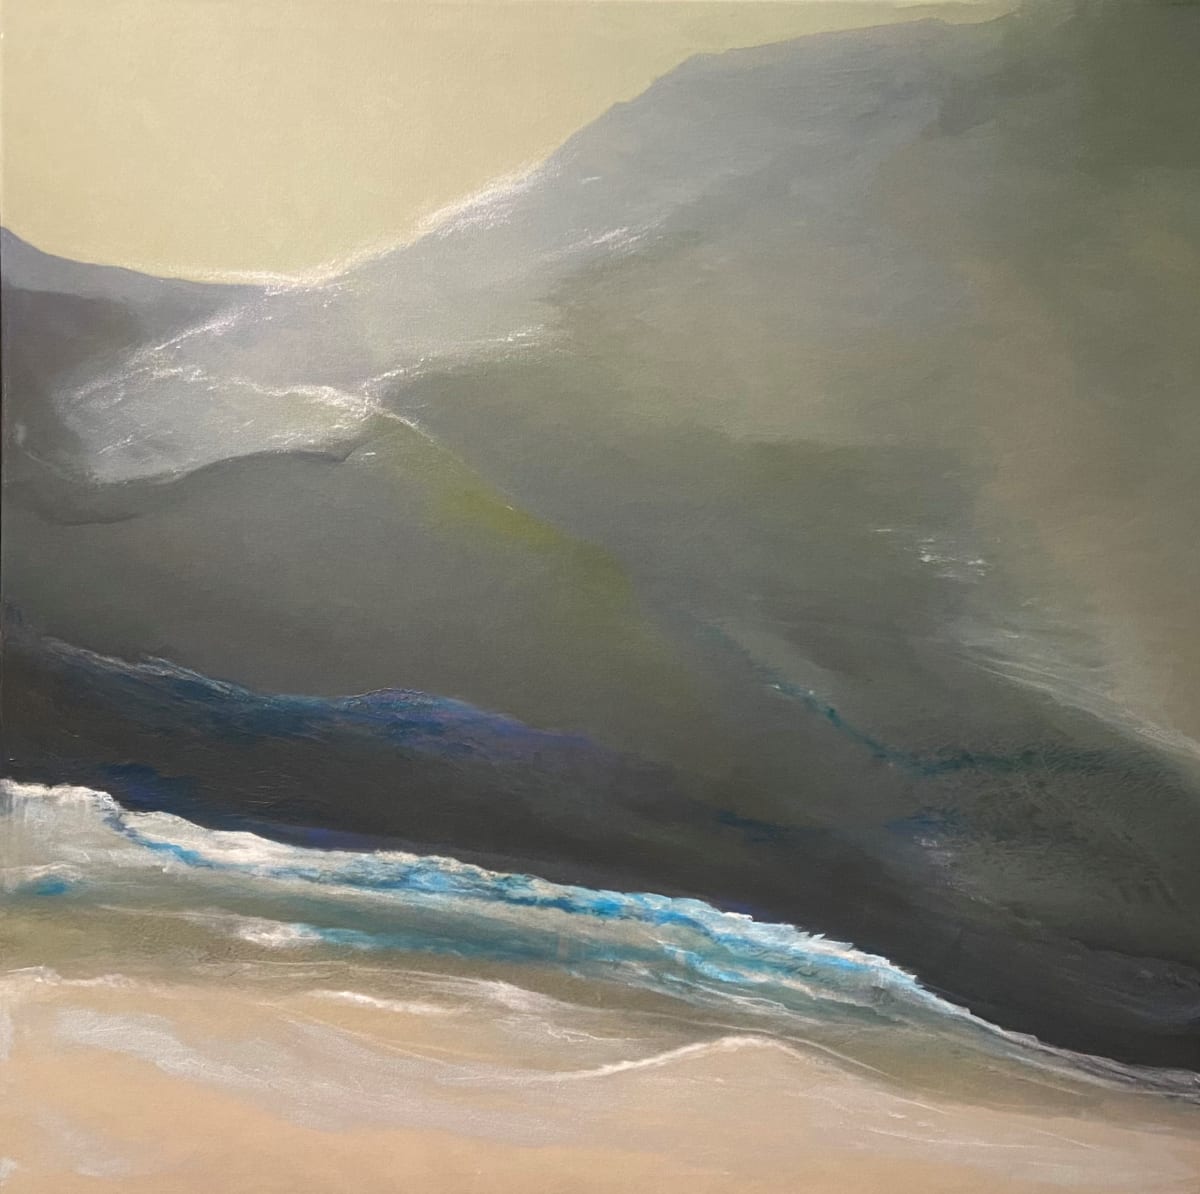 Pacific Coast View I by Julia Ross  Image: Soothing, earthy hues lend a sense of calm and steadiness to this painting even as it celebrates the perpetual movement of the ocean tides as they meet the shore. This hand-touched limited edition may also be purchased as a diptych set, and features a light wood floating frame.